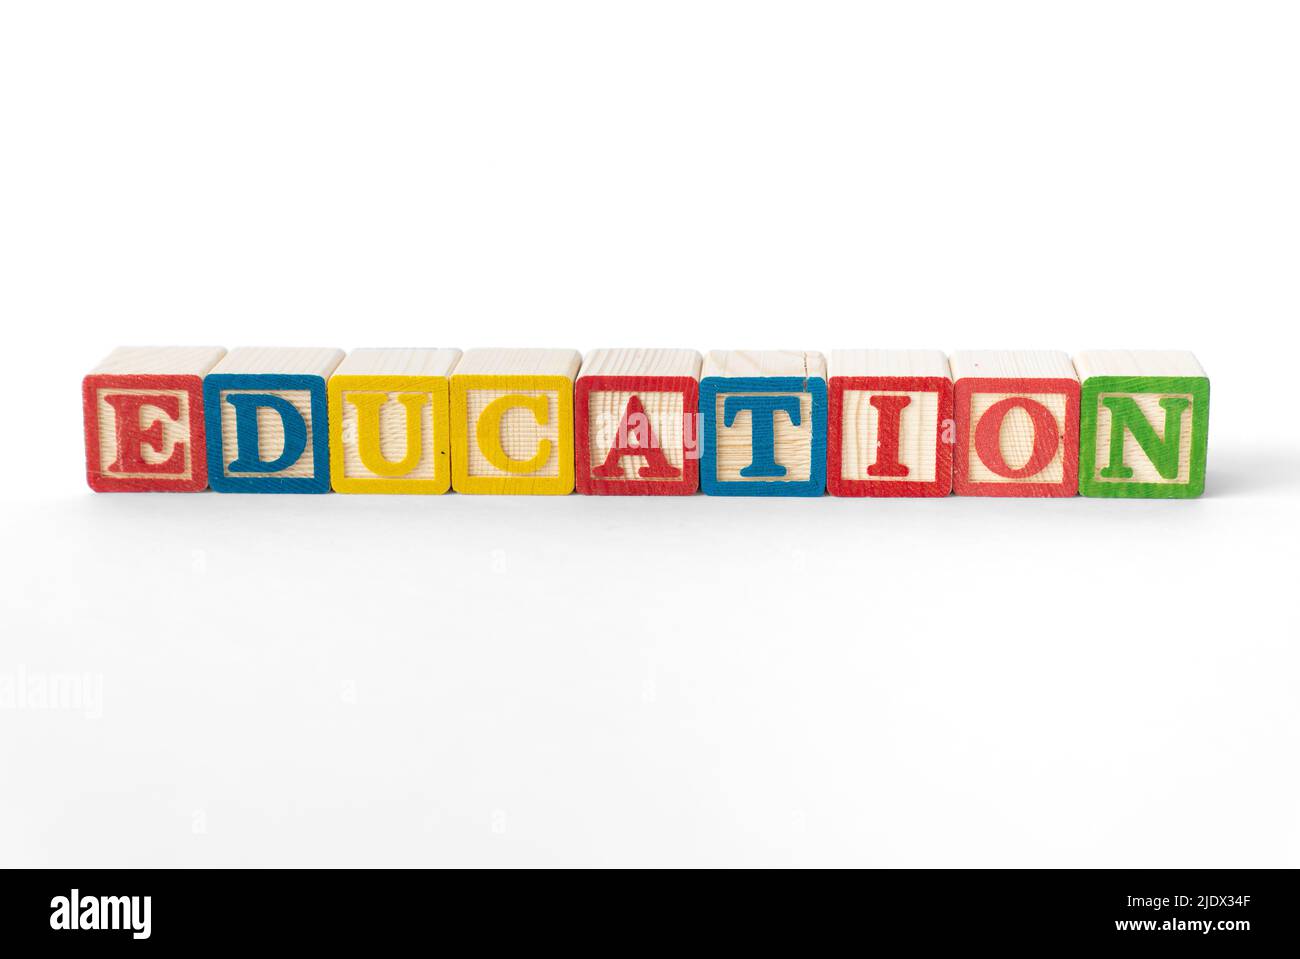 The word Education spelled with colorful toy blocks on a white background Stock Photo